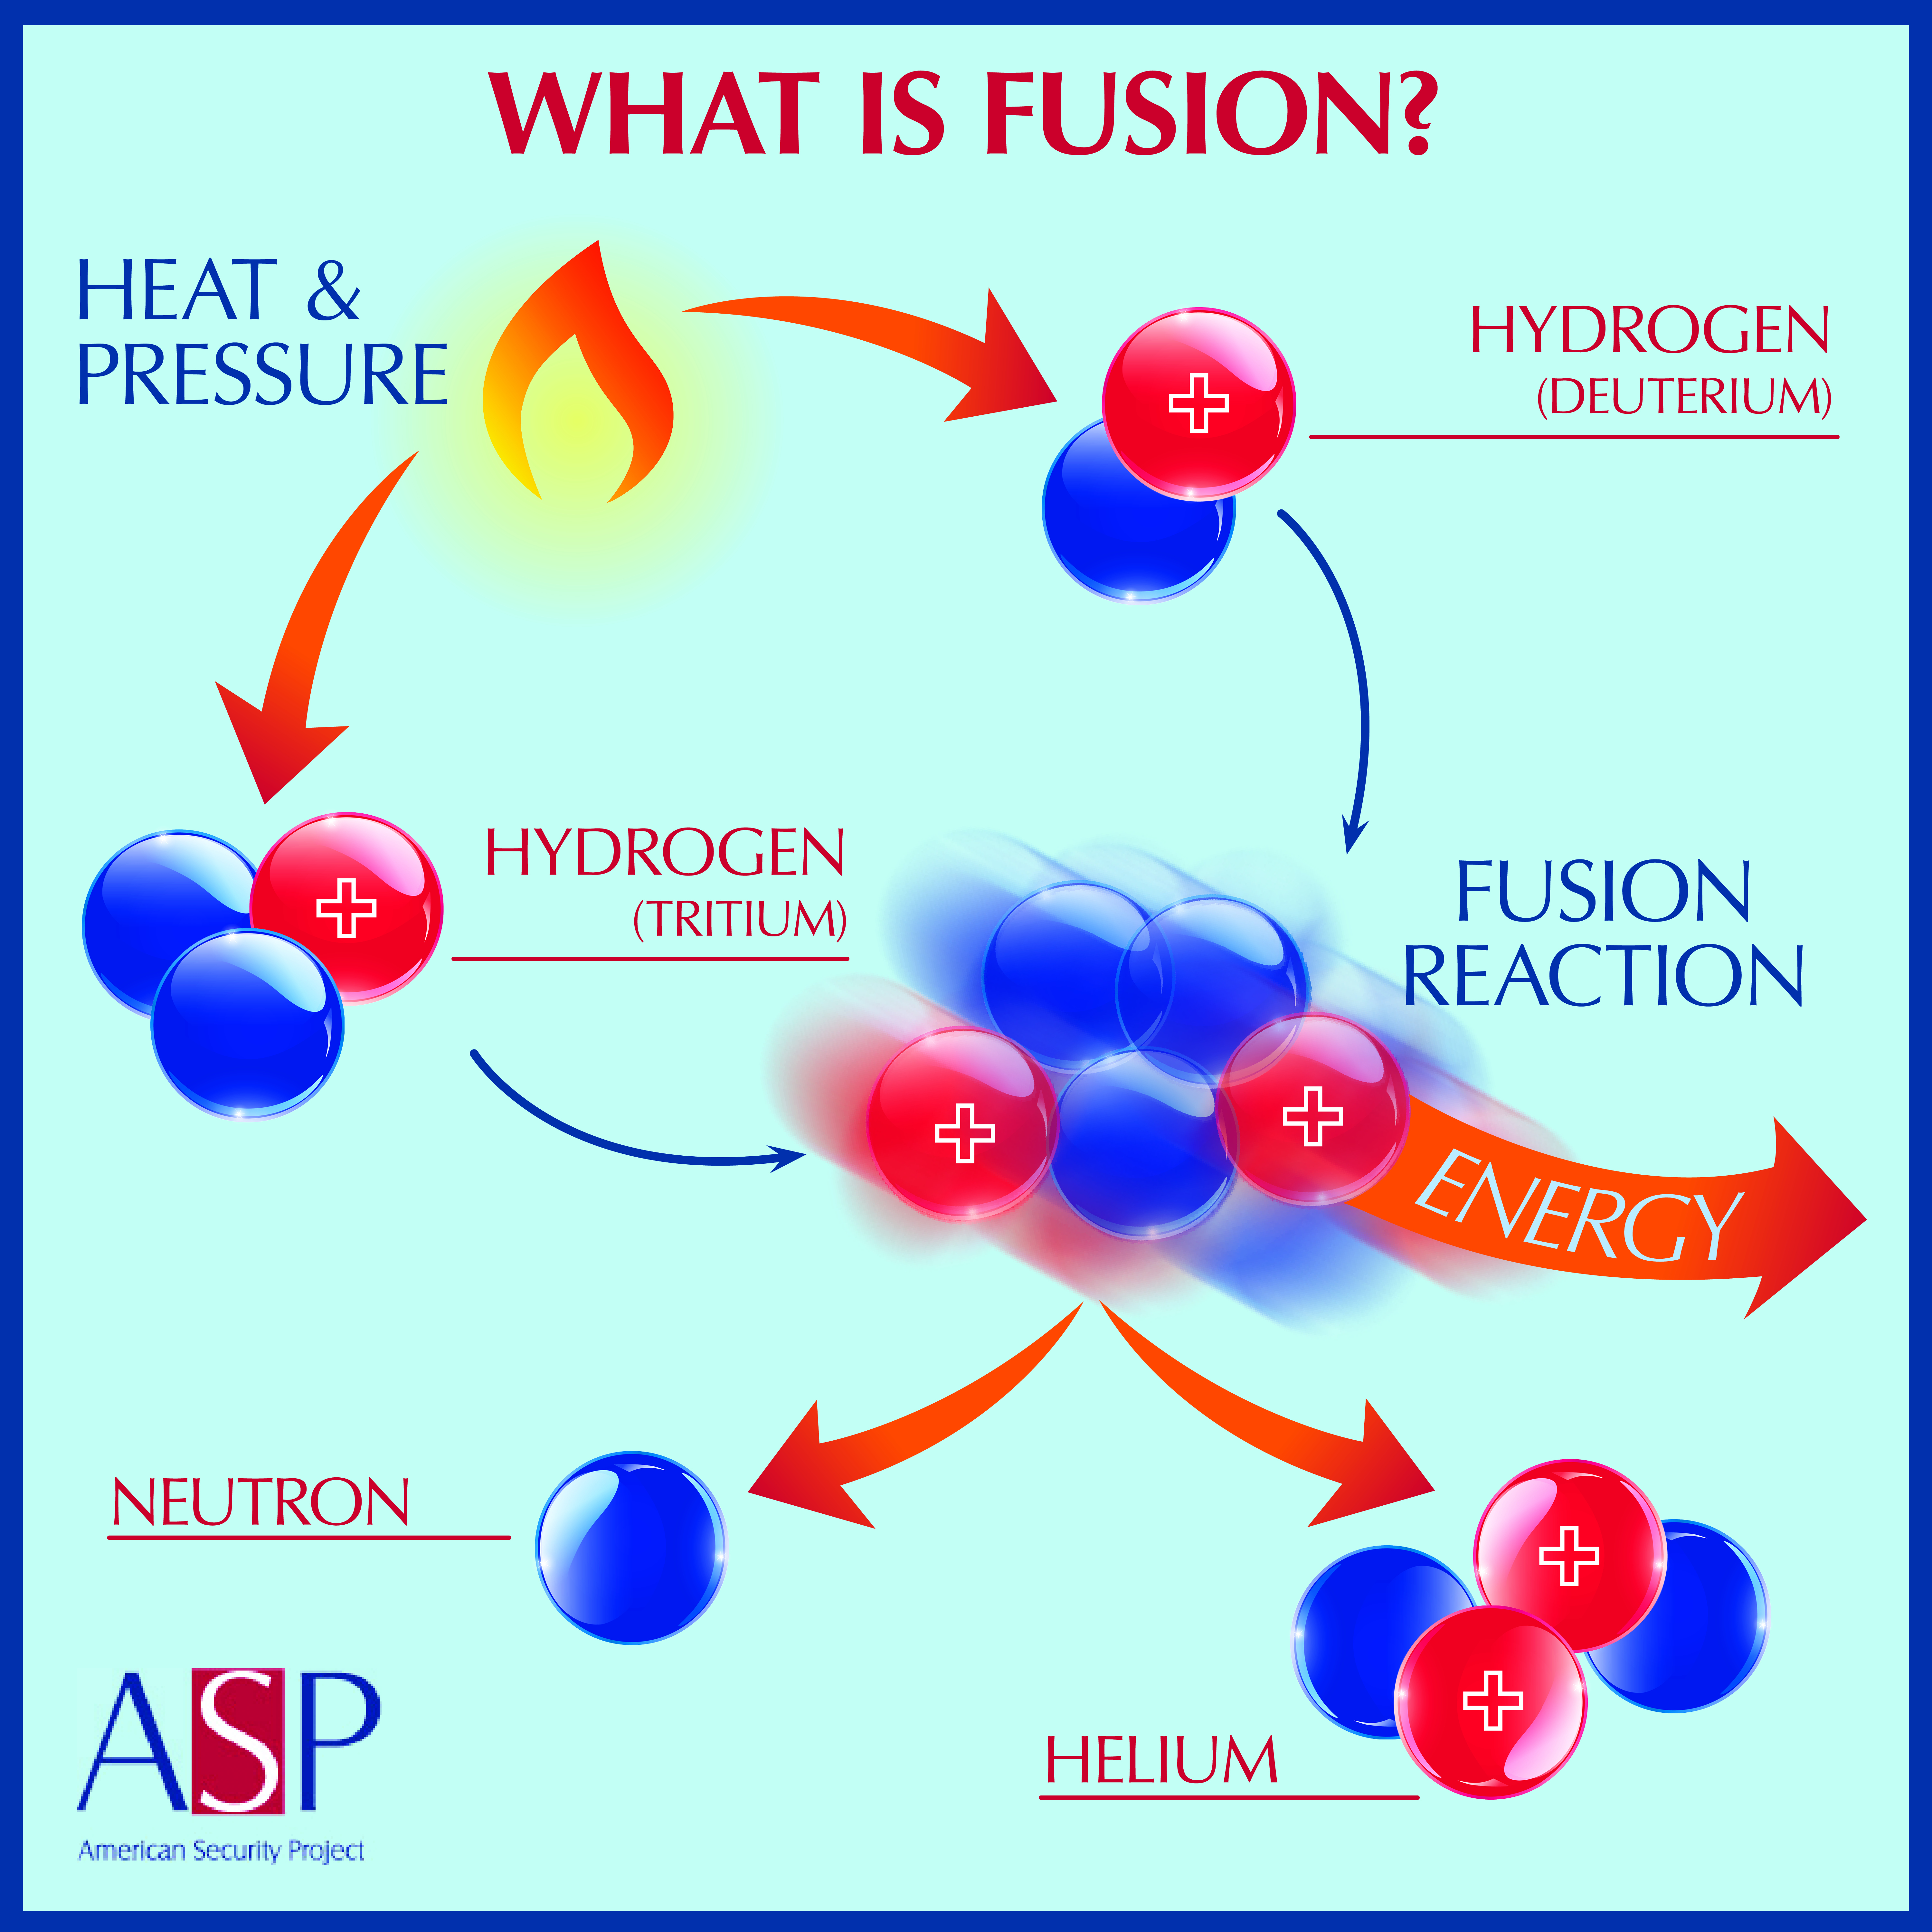 Fusion is “the perfect way to make energy”